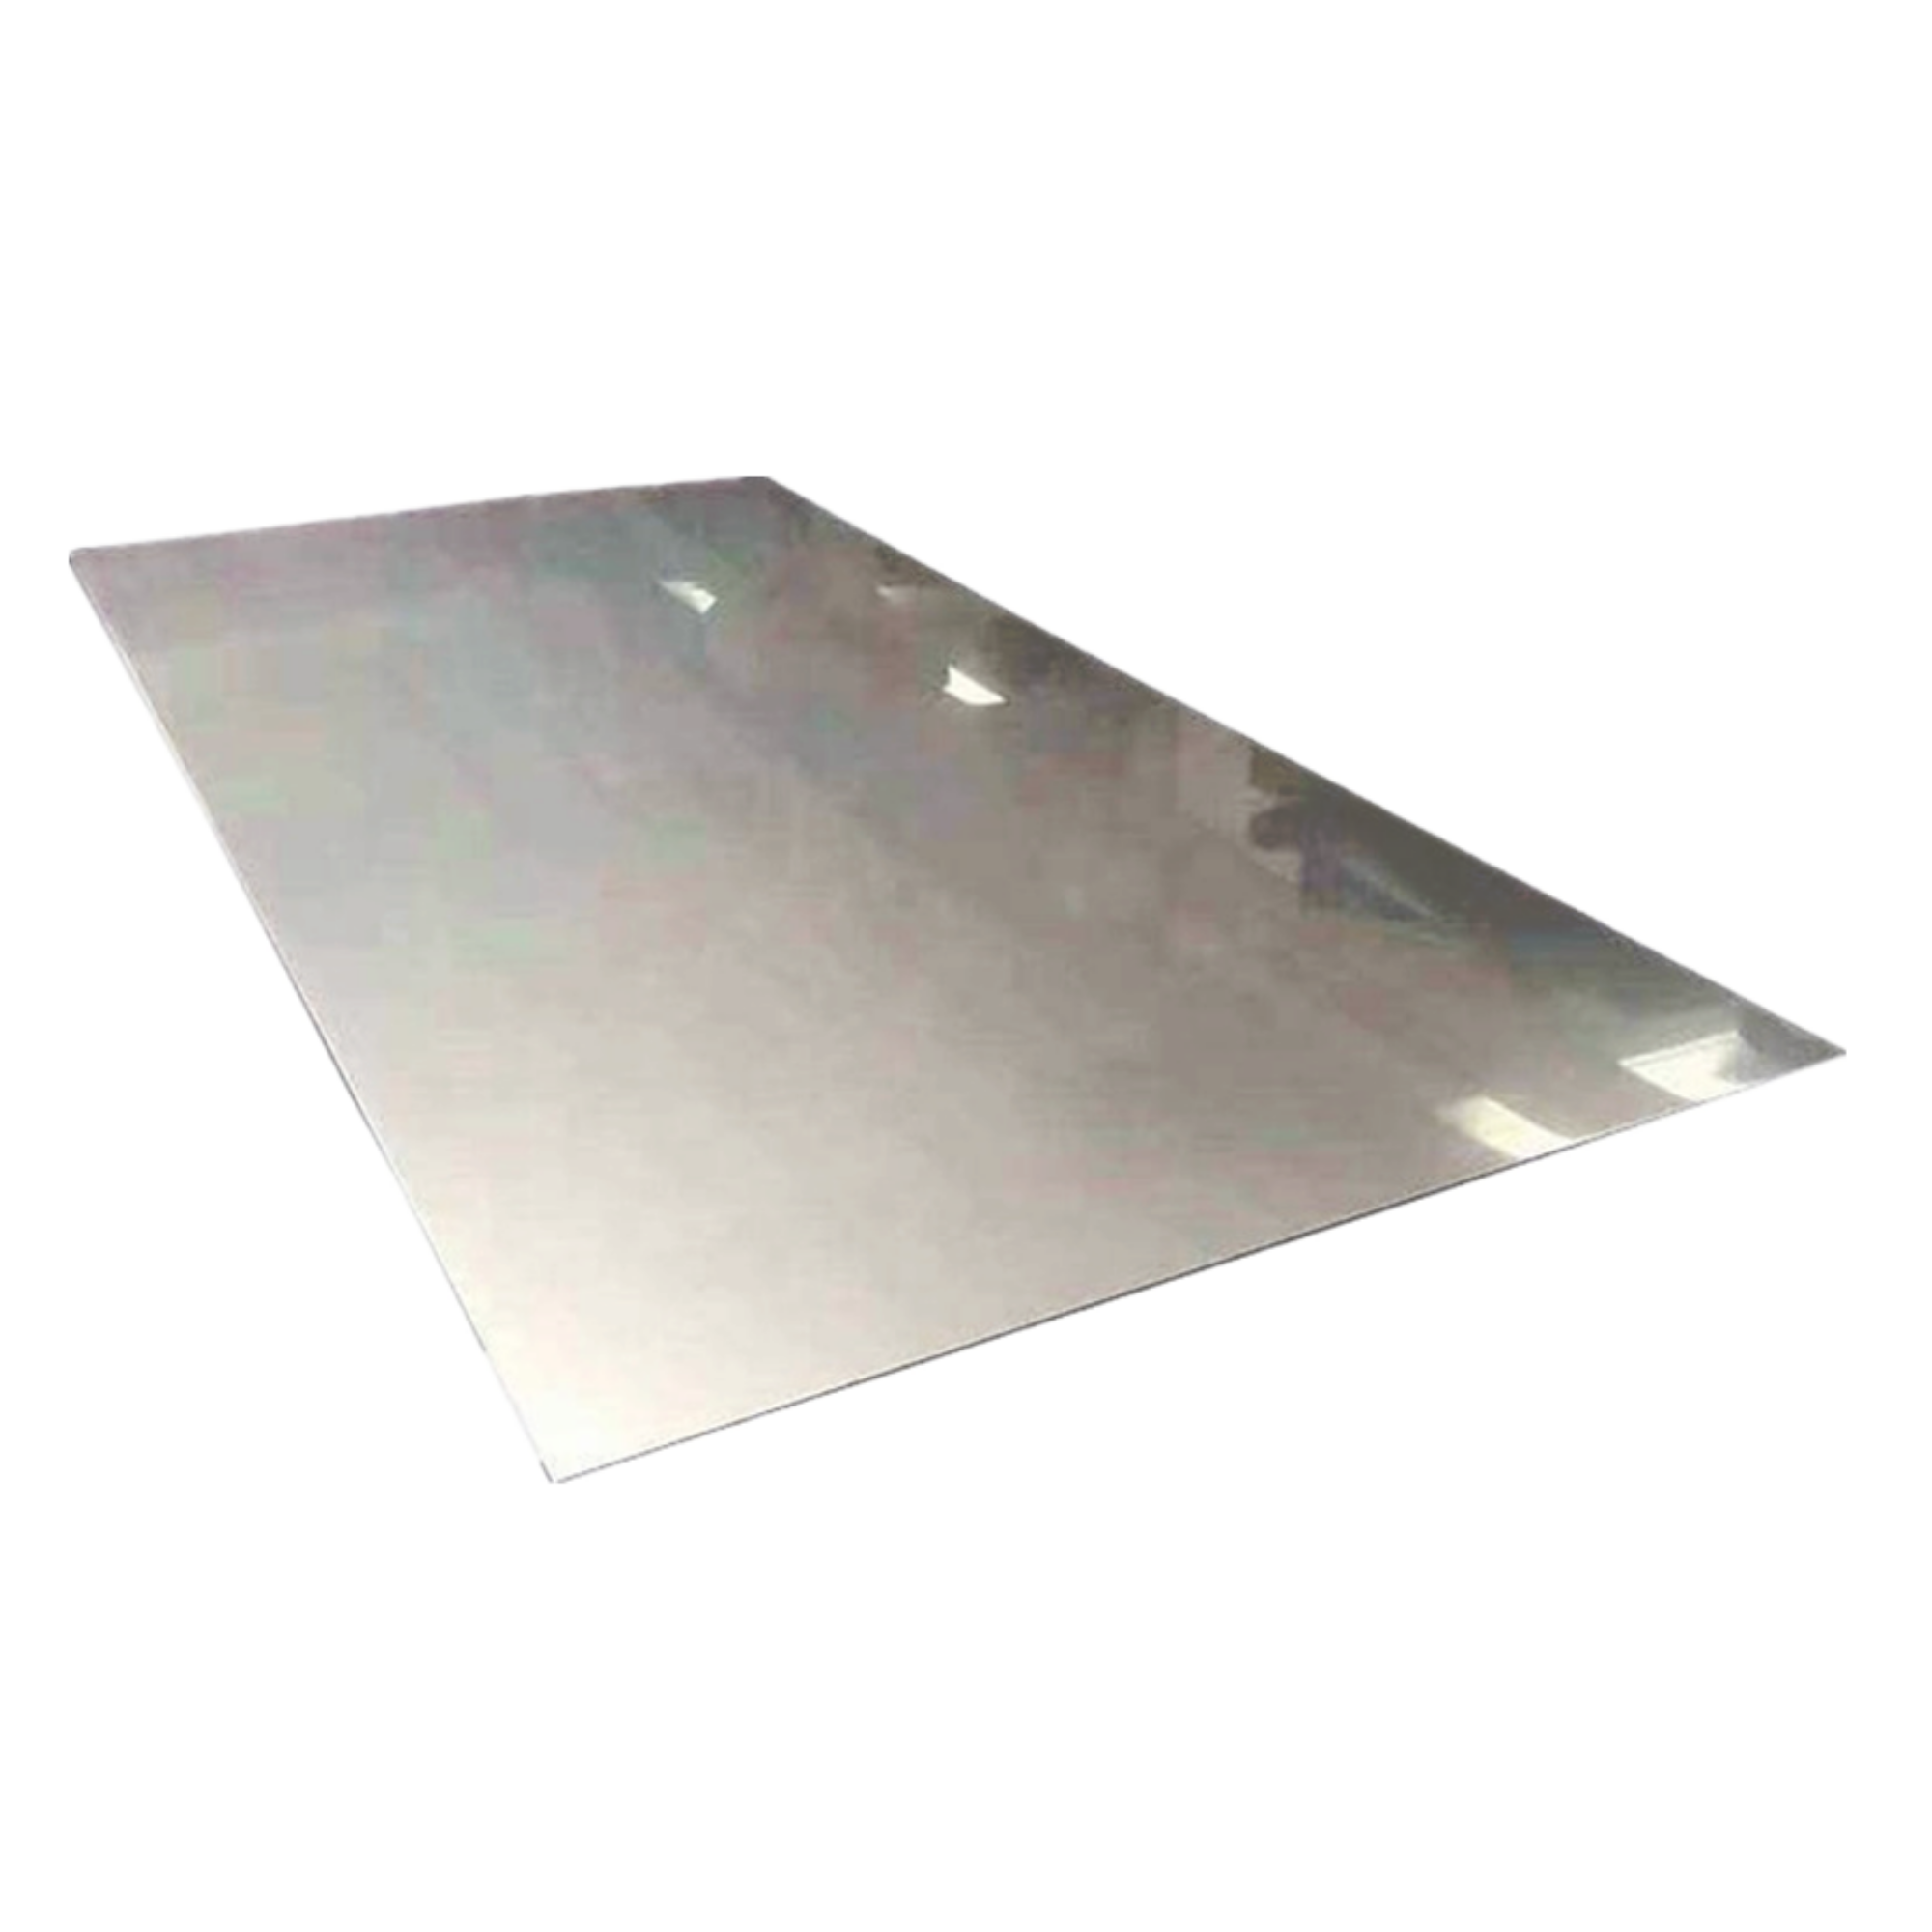 1mm 2mm 3mm 4mm 5mm stainless steel sheet 304 ss plate